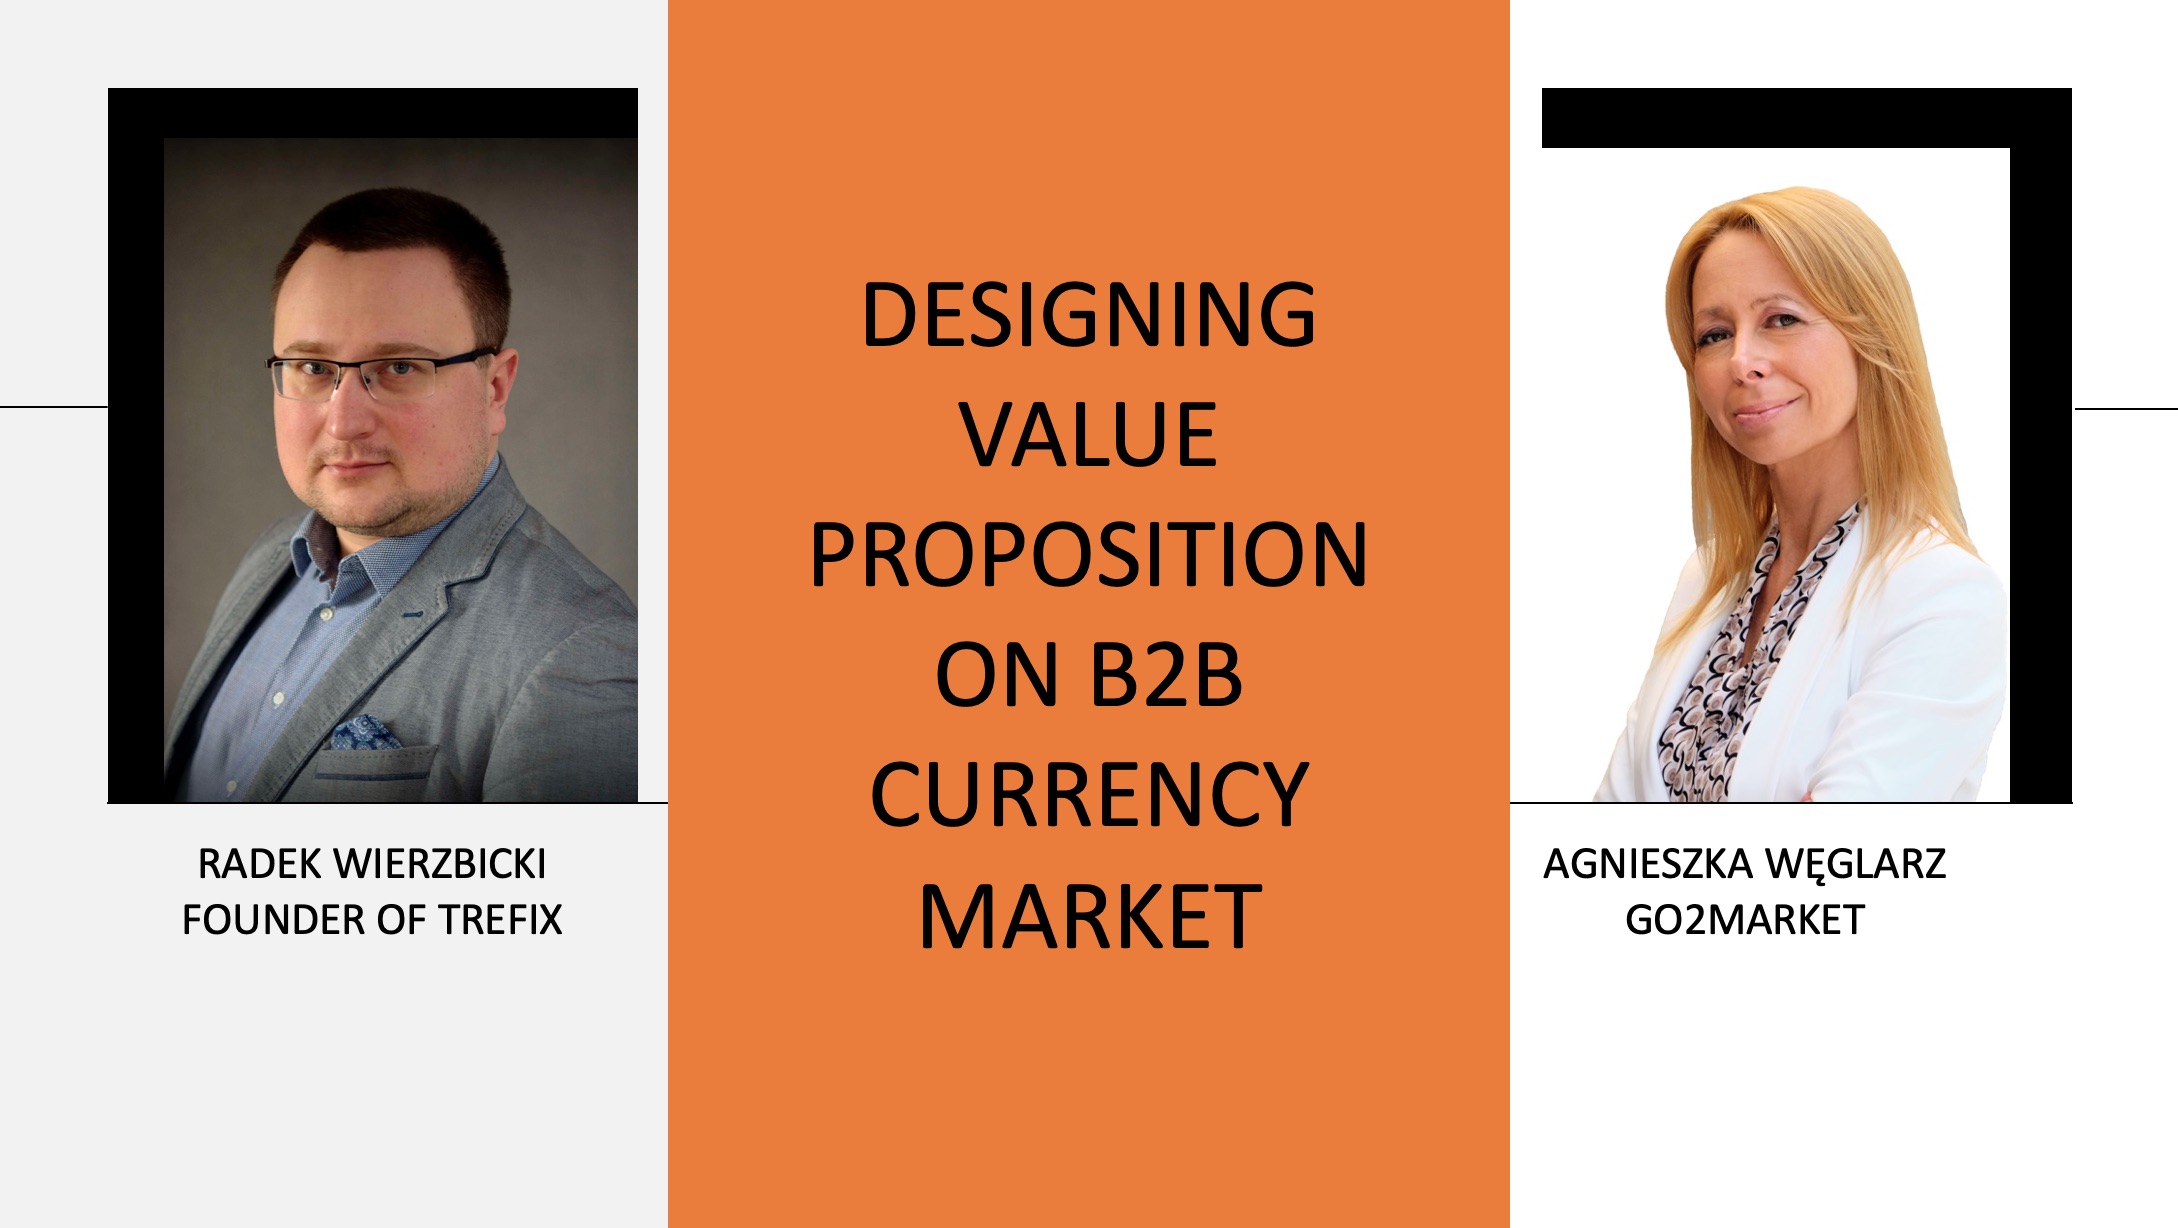 Value proposition on a B2B currency market